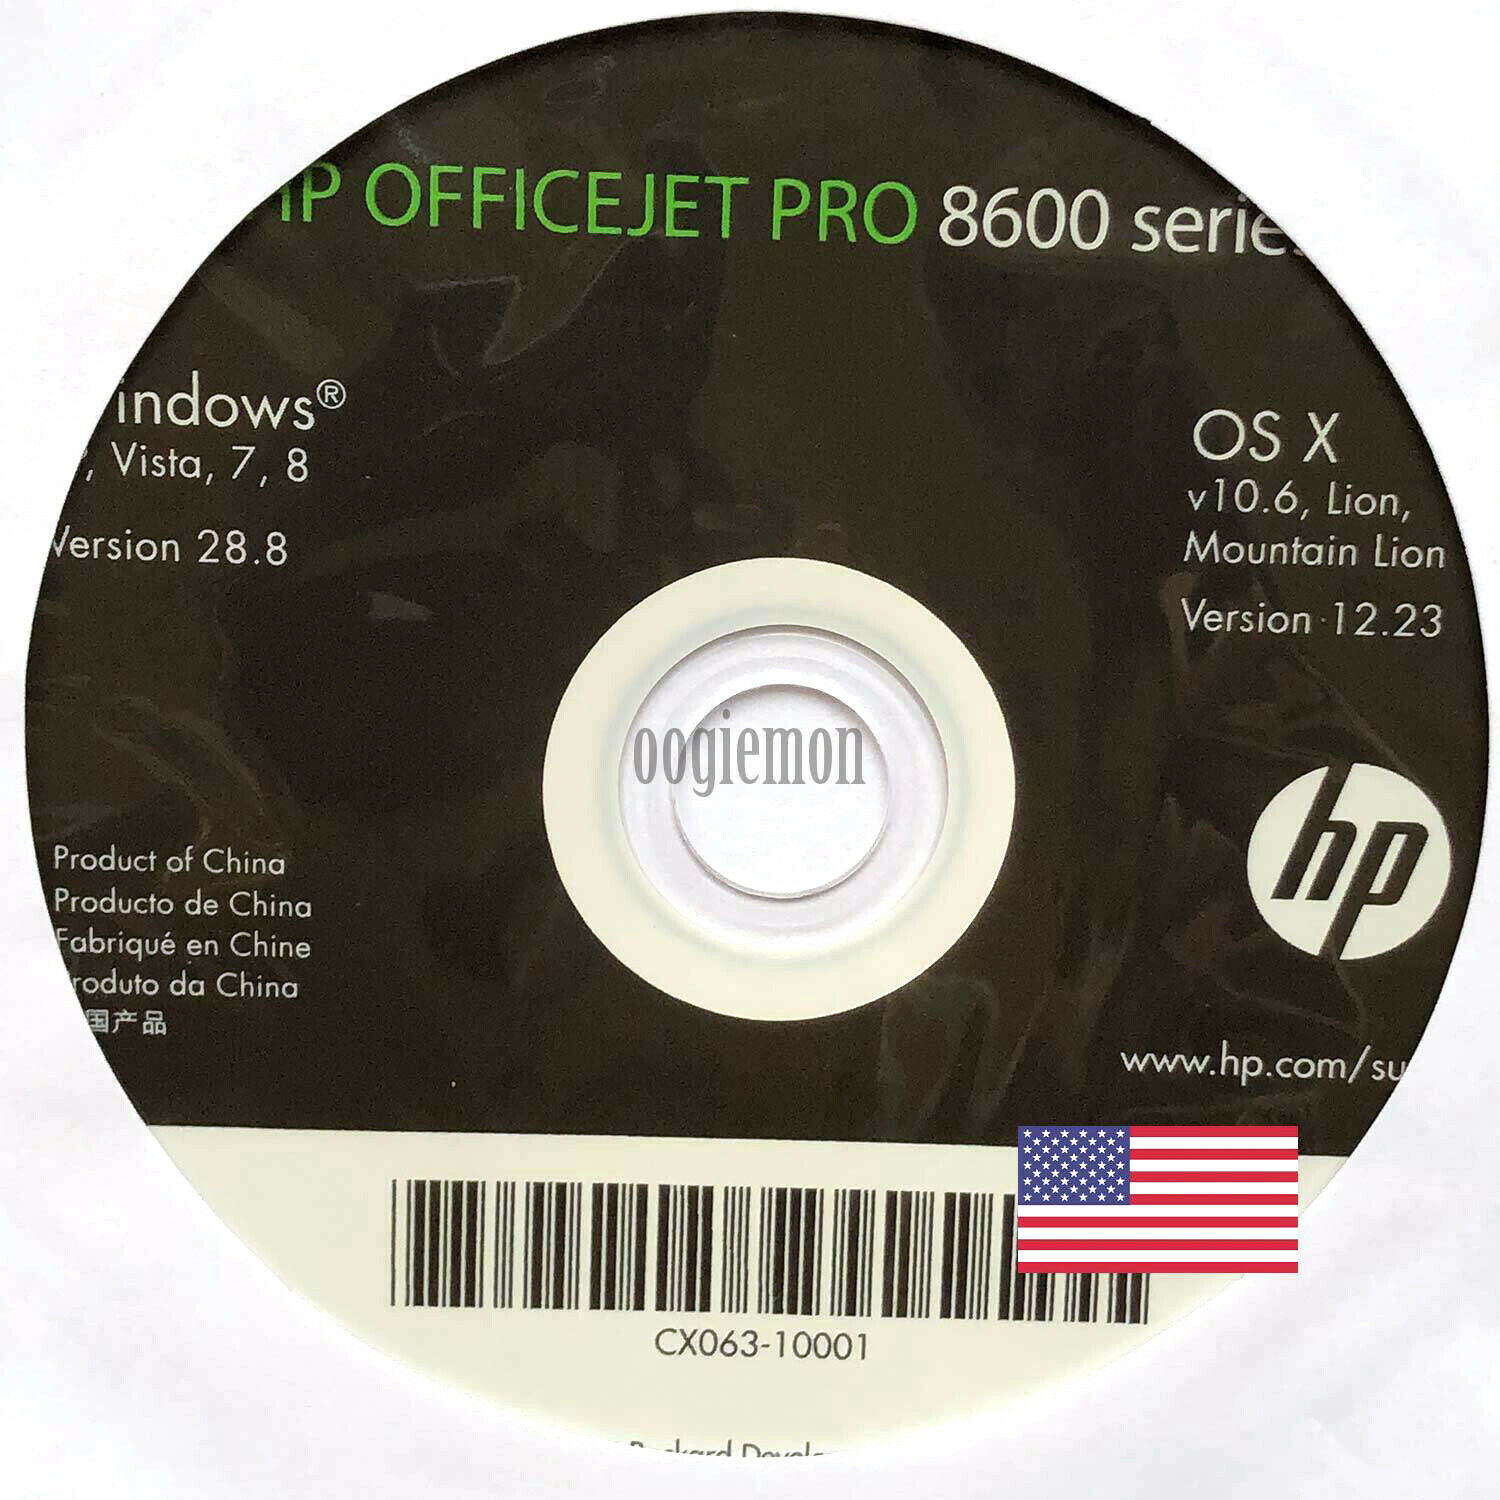 Setup Cd Rom For Hp Officejet Pro 8600 Series Software For Windows And Macos